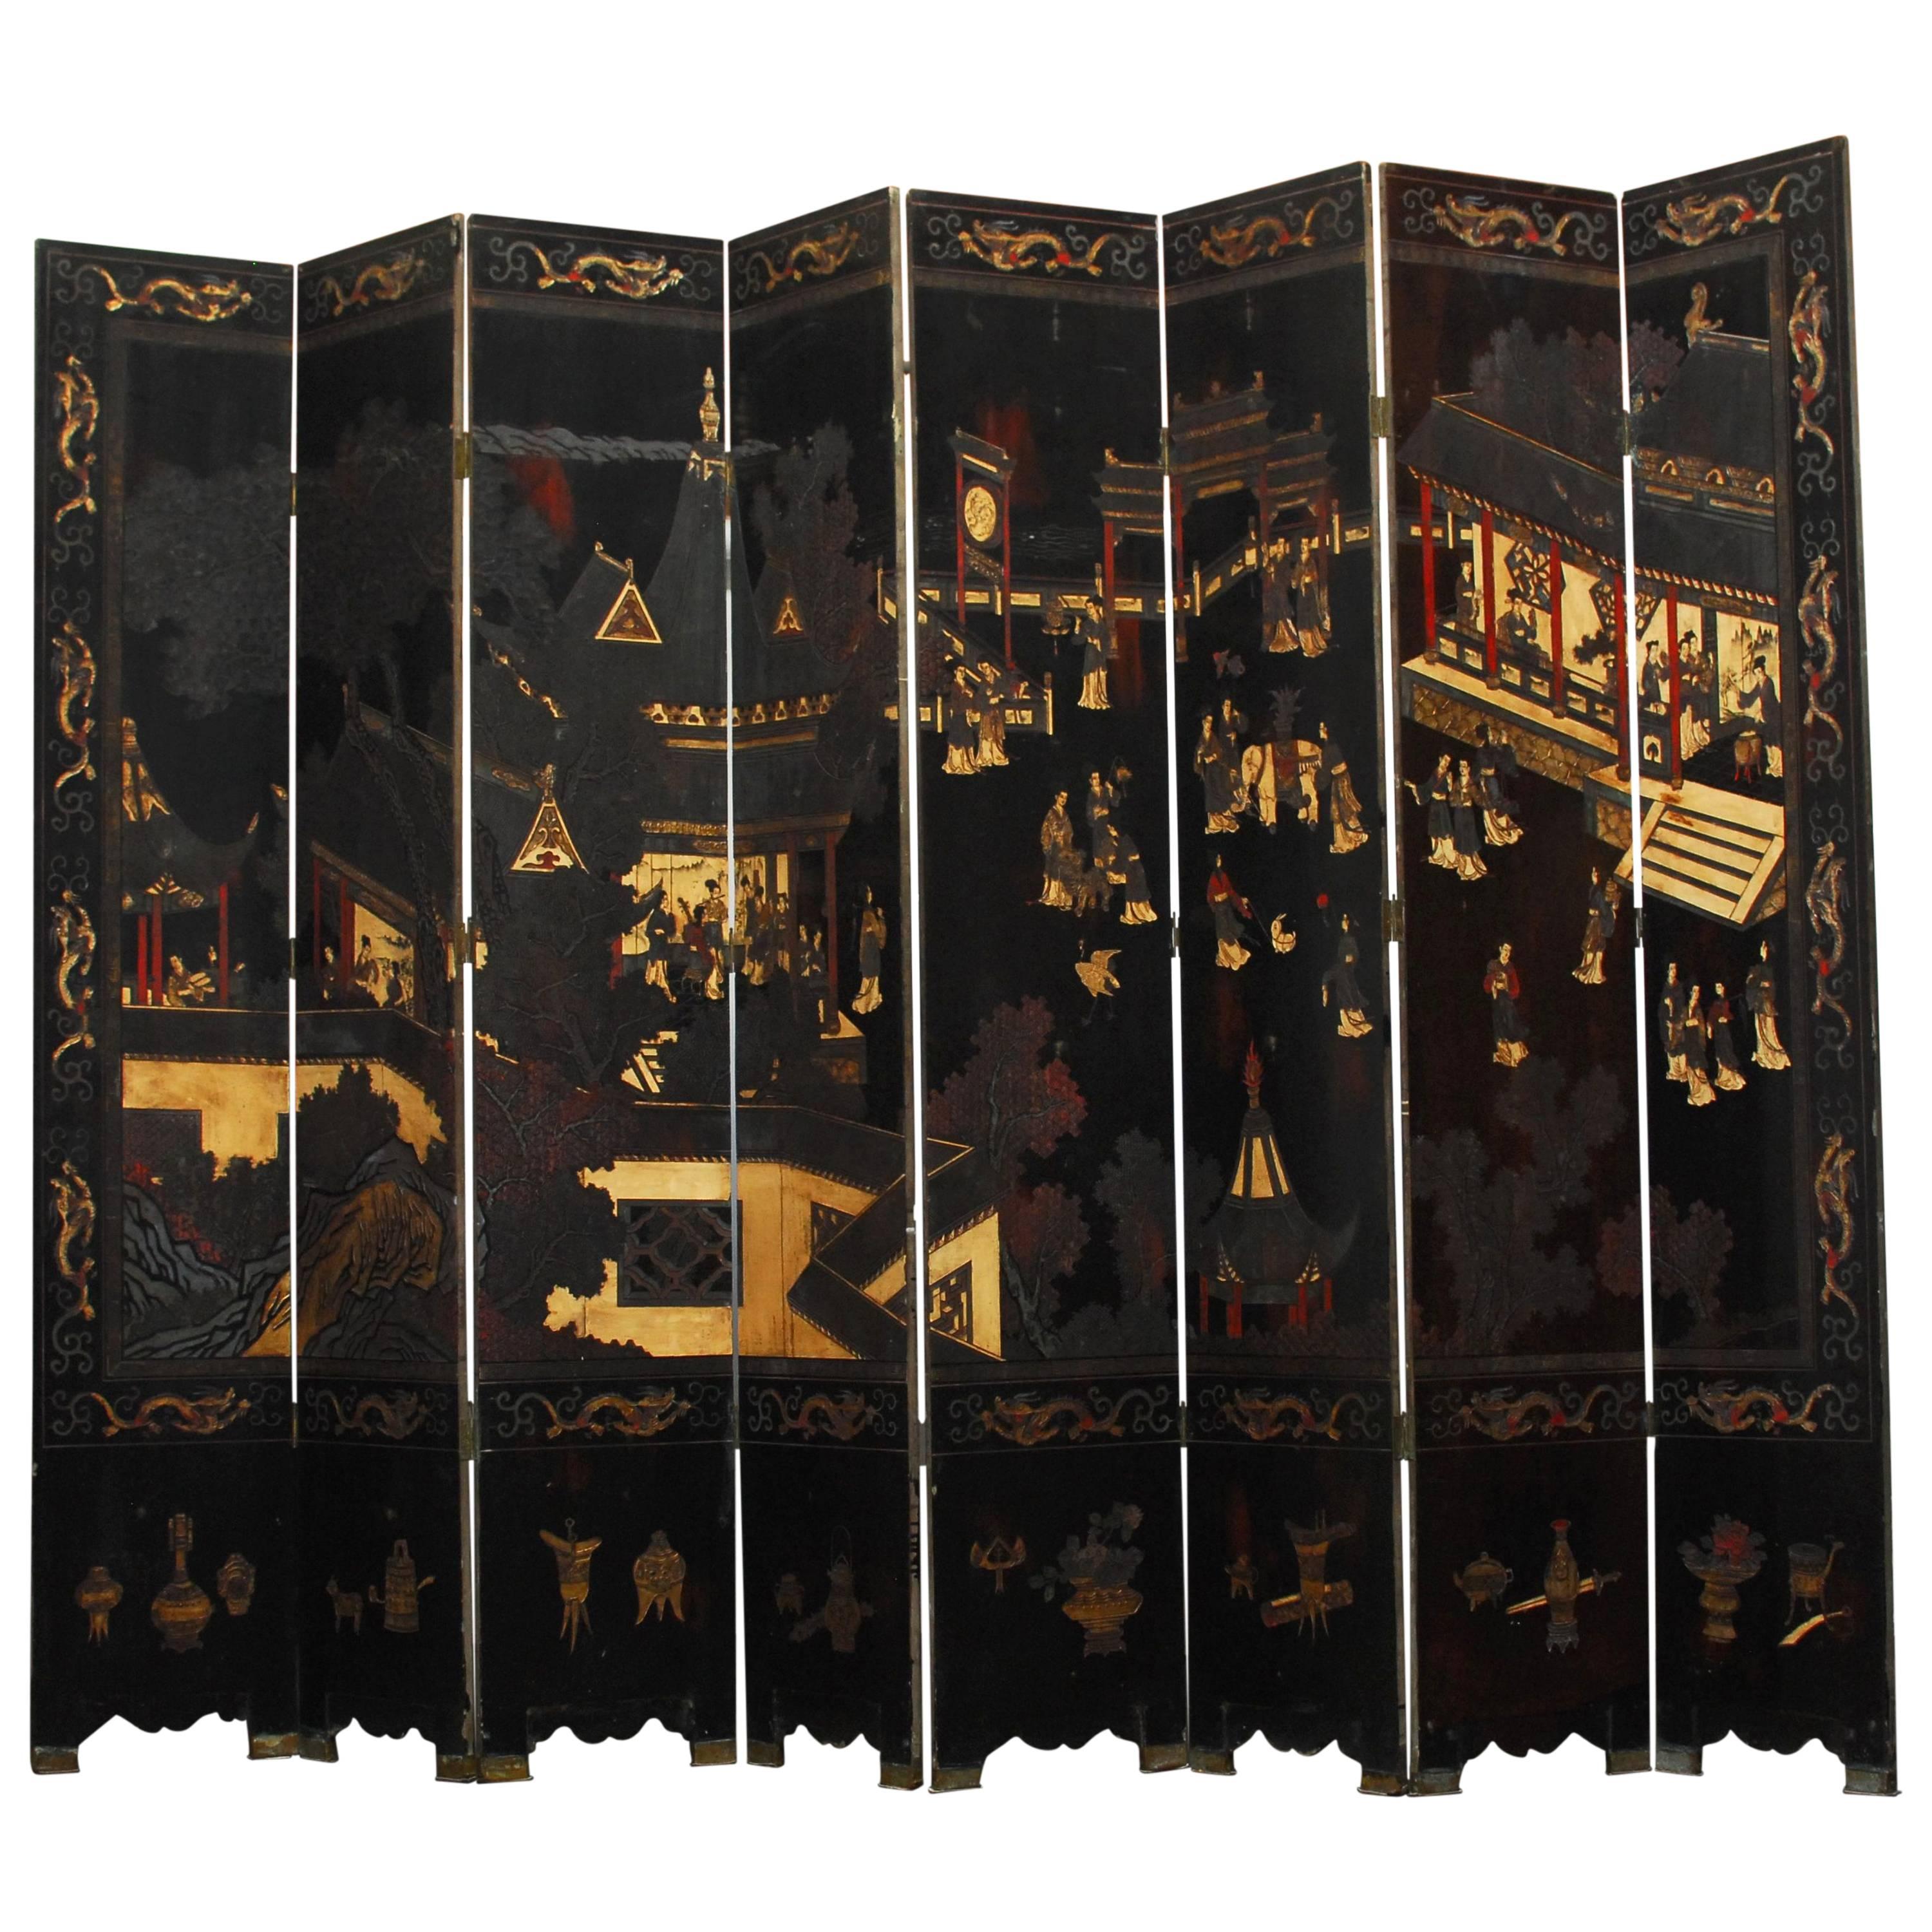 Huge eight-panel Coromandel screen featuring social gatherings of musicians, elephants and people around pagodas. Made of heavy, solid rosewood and carved from thick layers of lacquer. Double-sided with the front having a dragon border and scholars